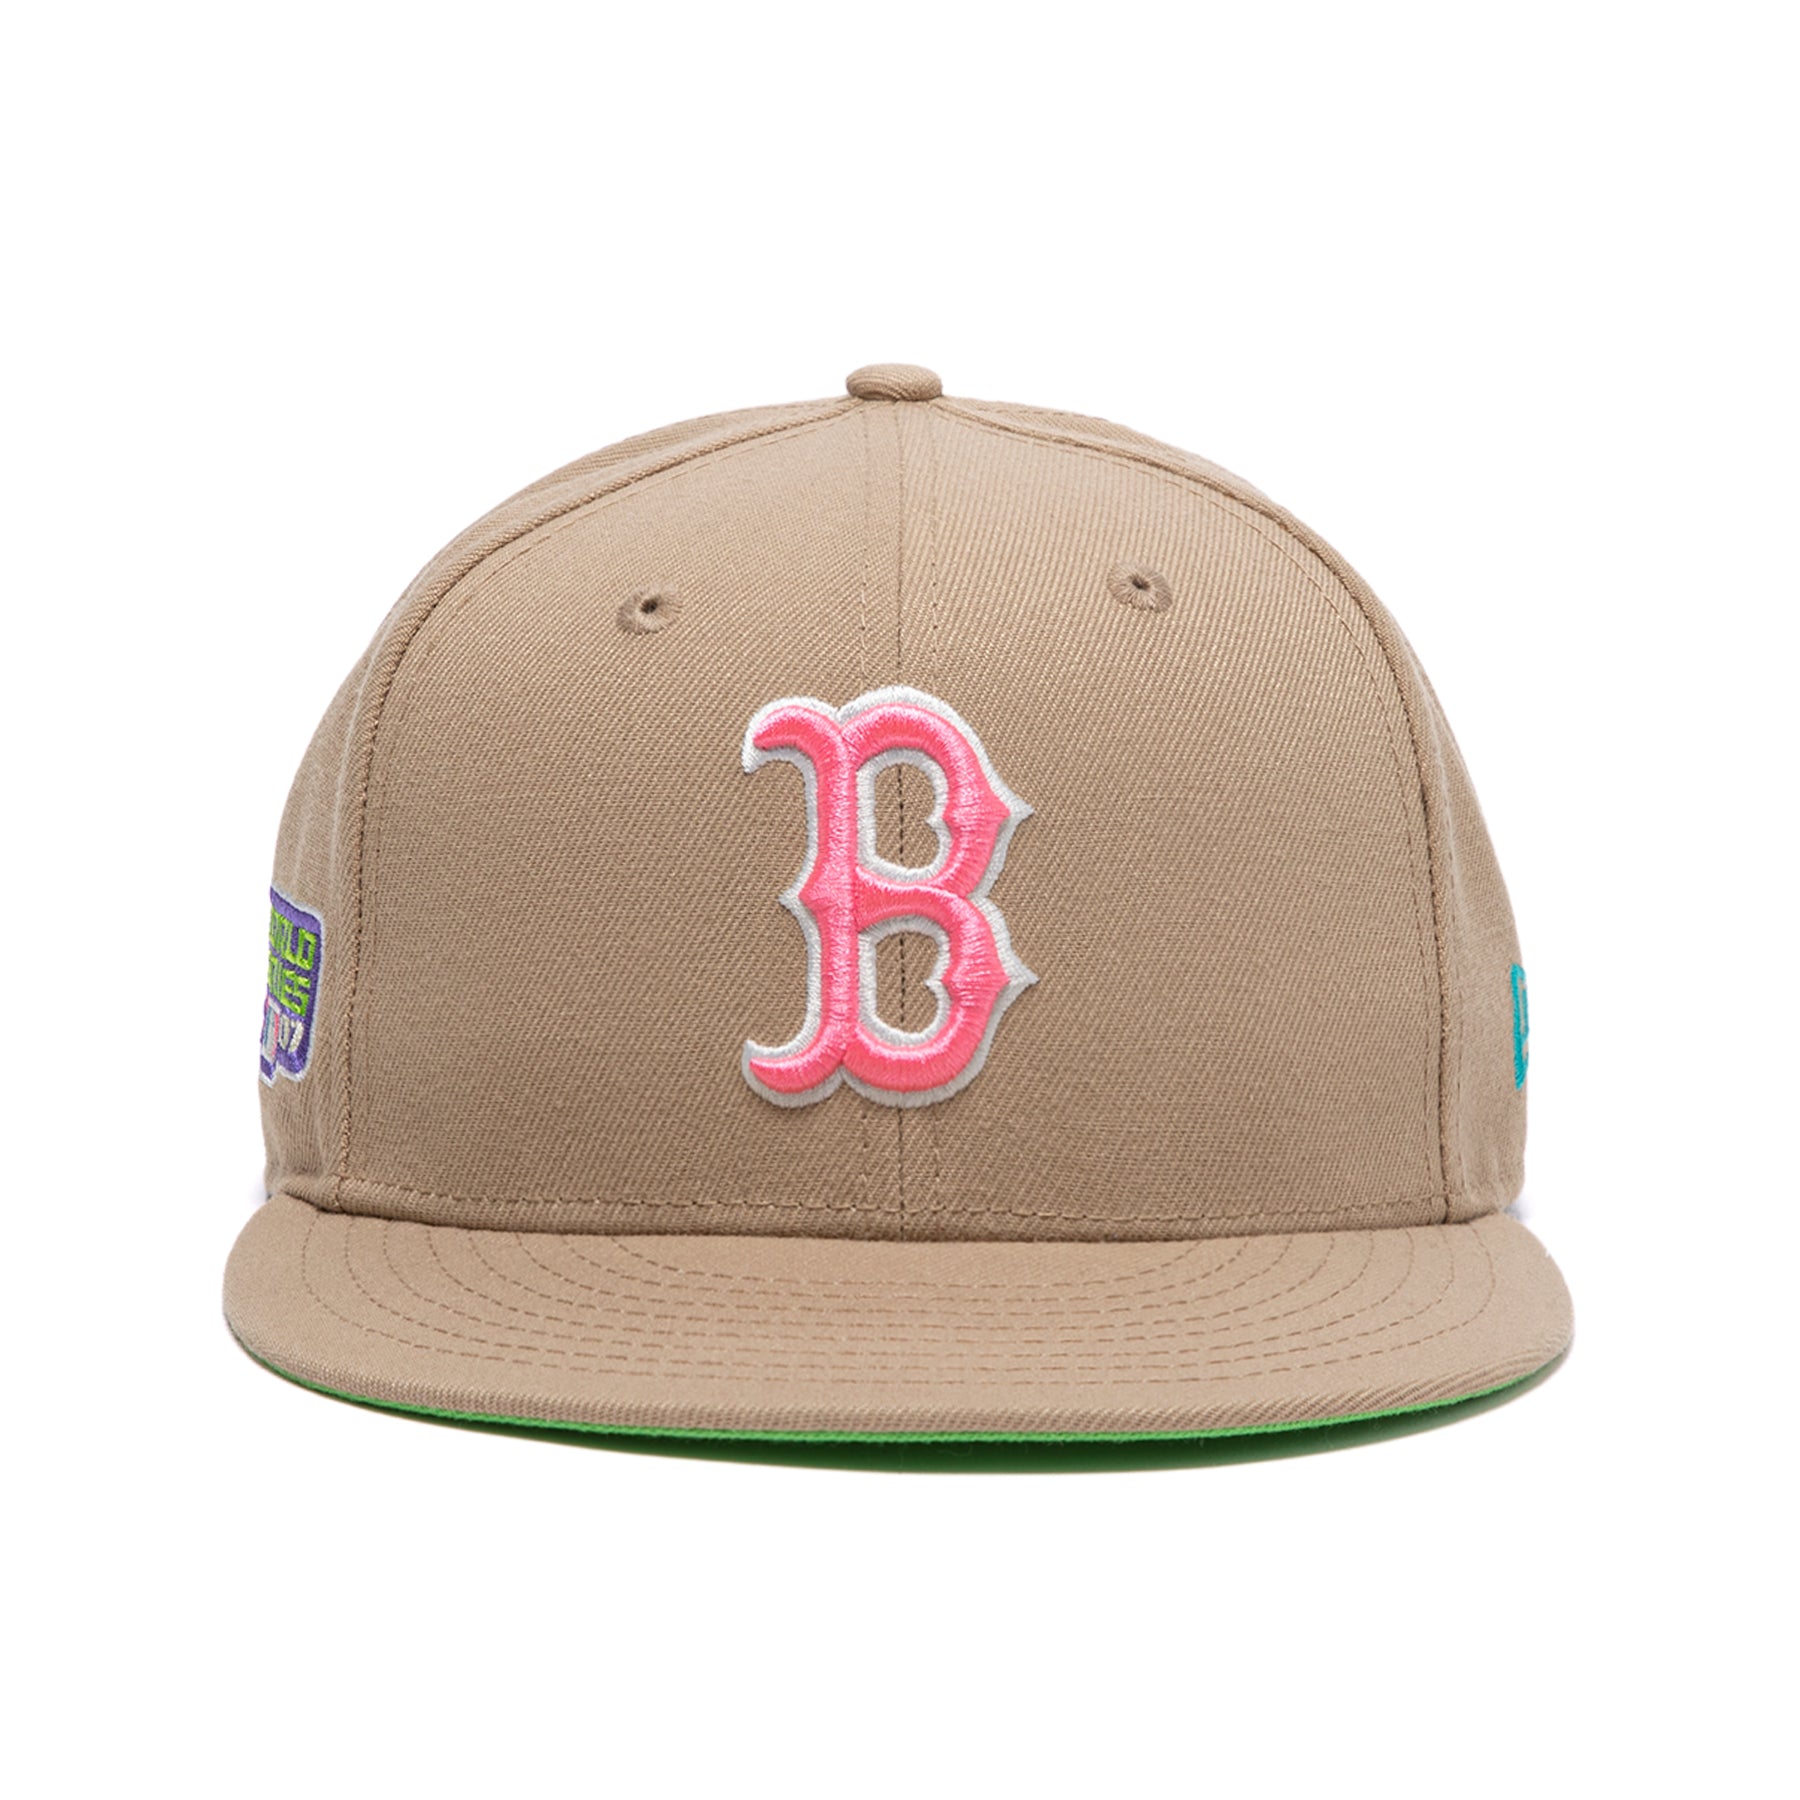 Concepts x New Era 59FIFTY Boston Red Sox Fitted Hat (Camel/Lime Green) 7 3/8